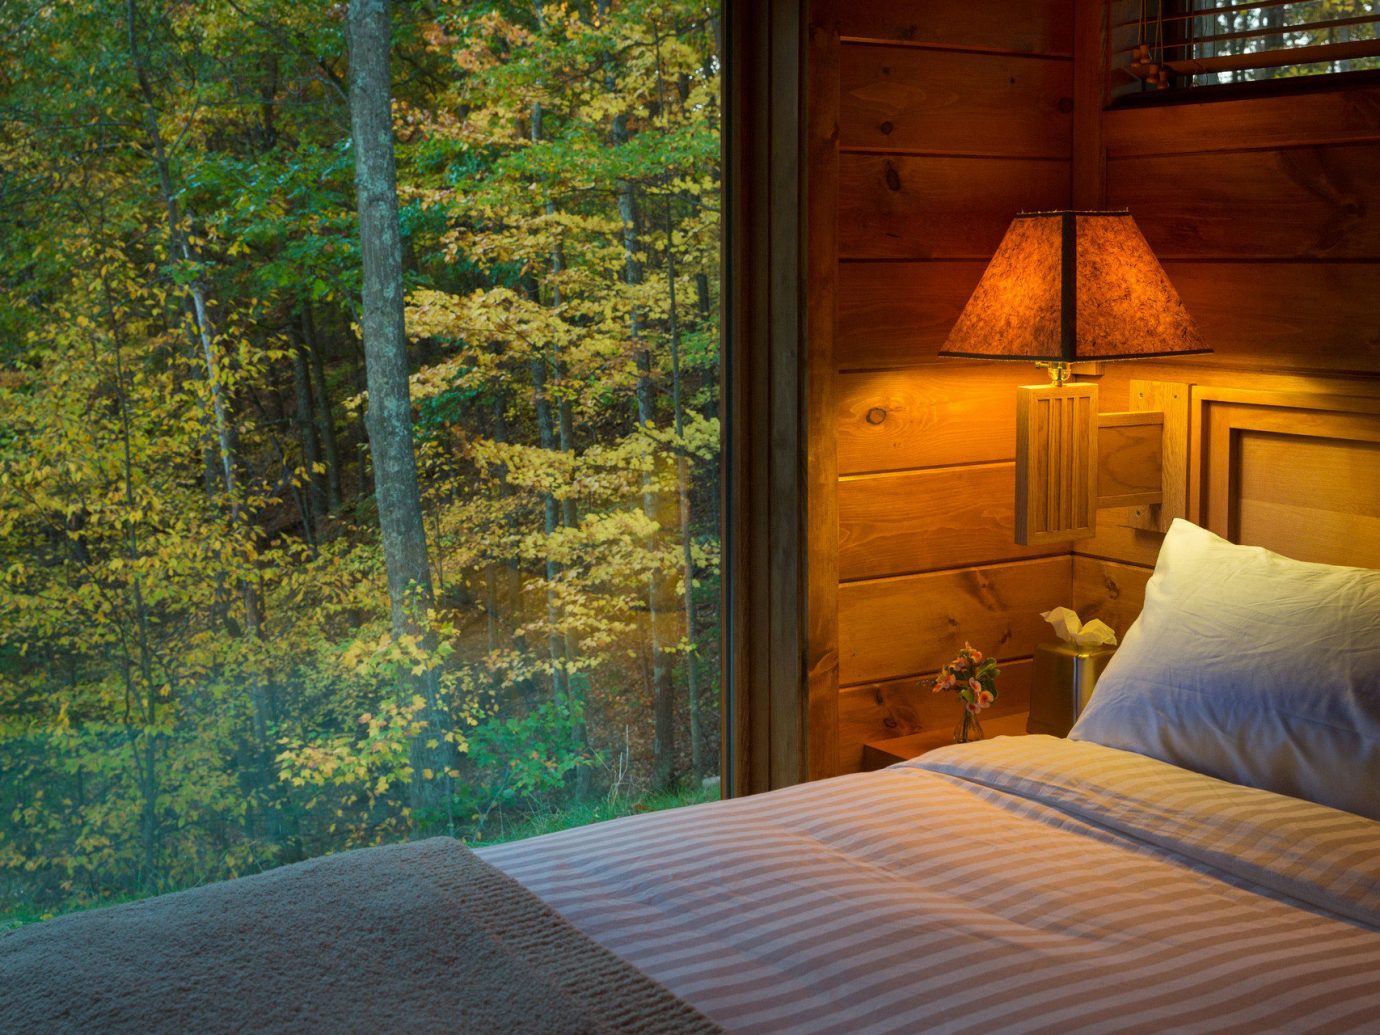 ambient lighting bed Bedroom Cabin calm charming cozy Forest isolation Lodge Luxury Nature Outdoors remote Rustic serene trees Trip Ideas view warm window woods indoor season estate sunlight cottage pillow autumn